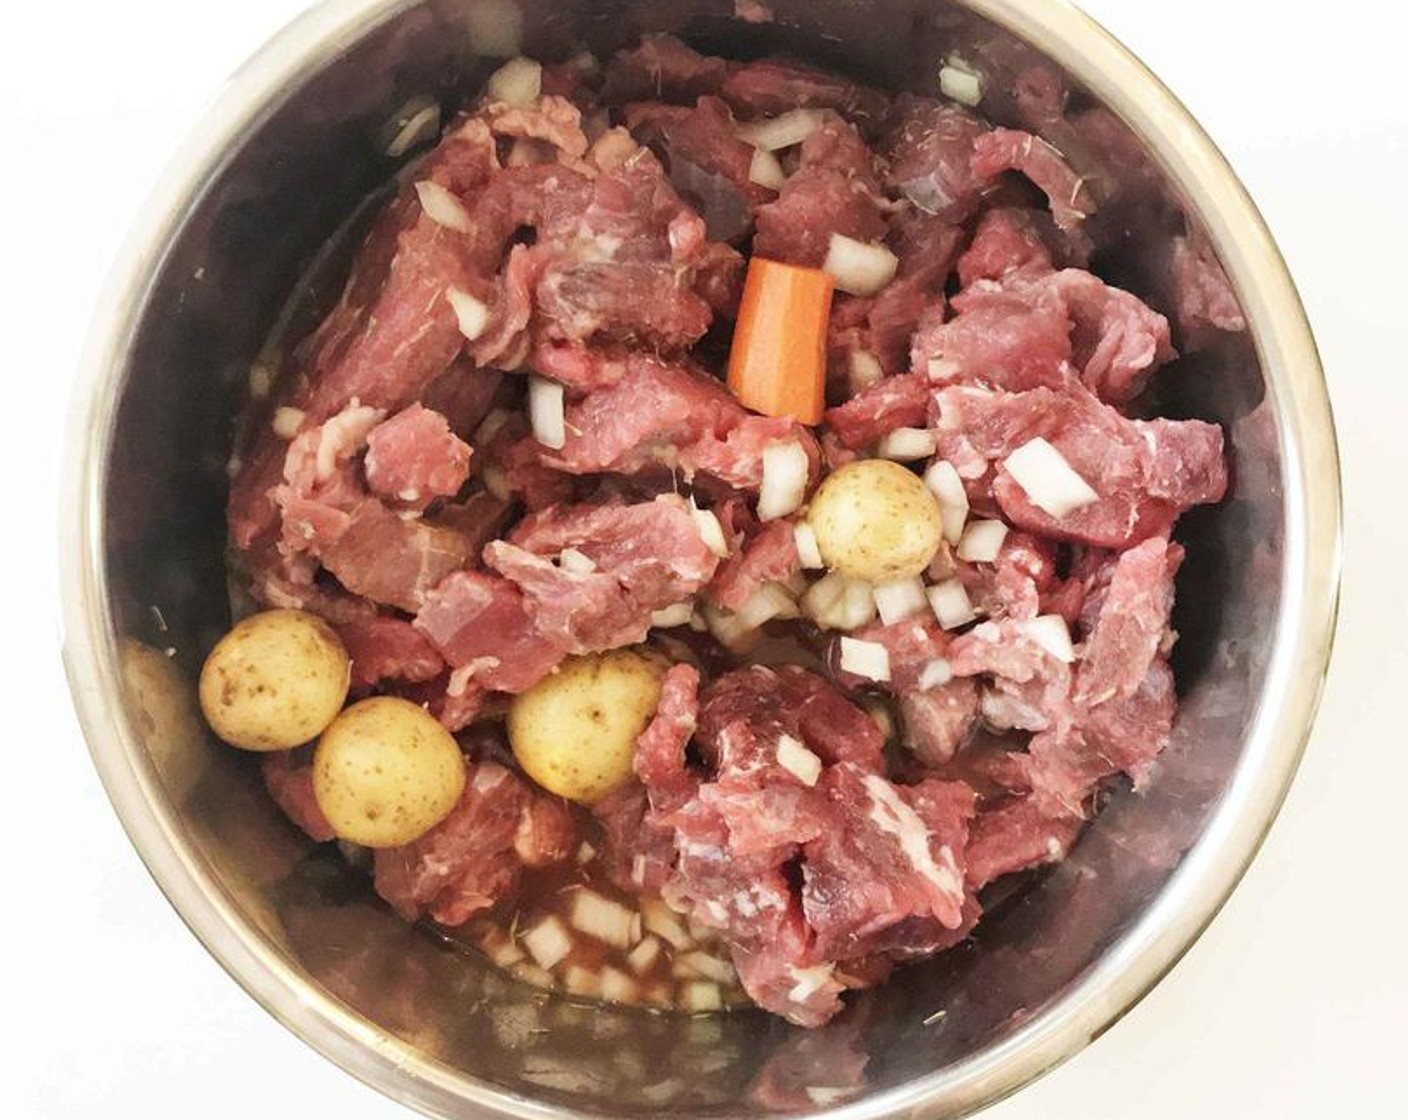 step 1 Place the Lean Beef Stew Meat (7 cups), Low-Sodium Beef Broth (4 cups), Baby Potatoes (1.5 lb), Carrots (2 cups), White Onion (1), Tomato Paste (2 Tbsp), Worcestershire Sauce (1 Tbsp), Garlic (4 cloves), Bay Leaf (1), and Fresh Thyme (1 tsp) in a large crock pot or instant pot.